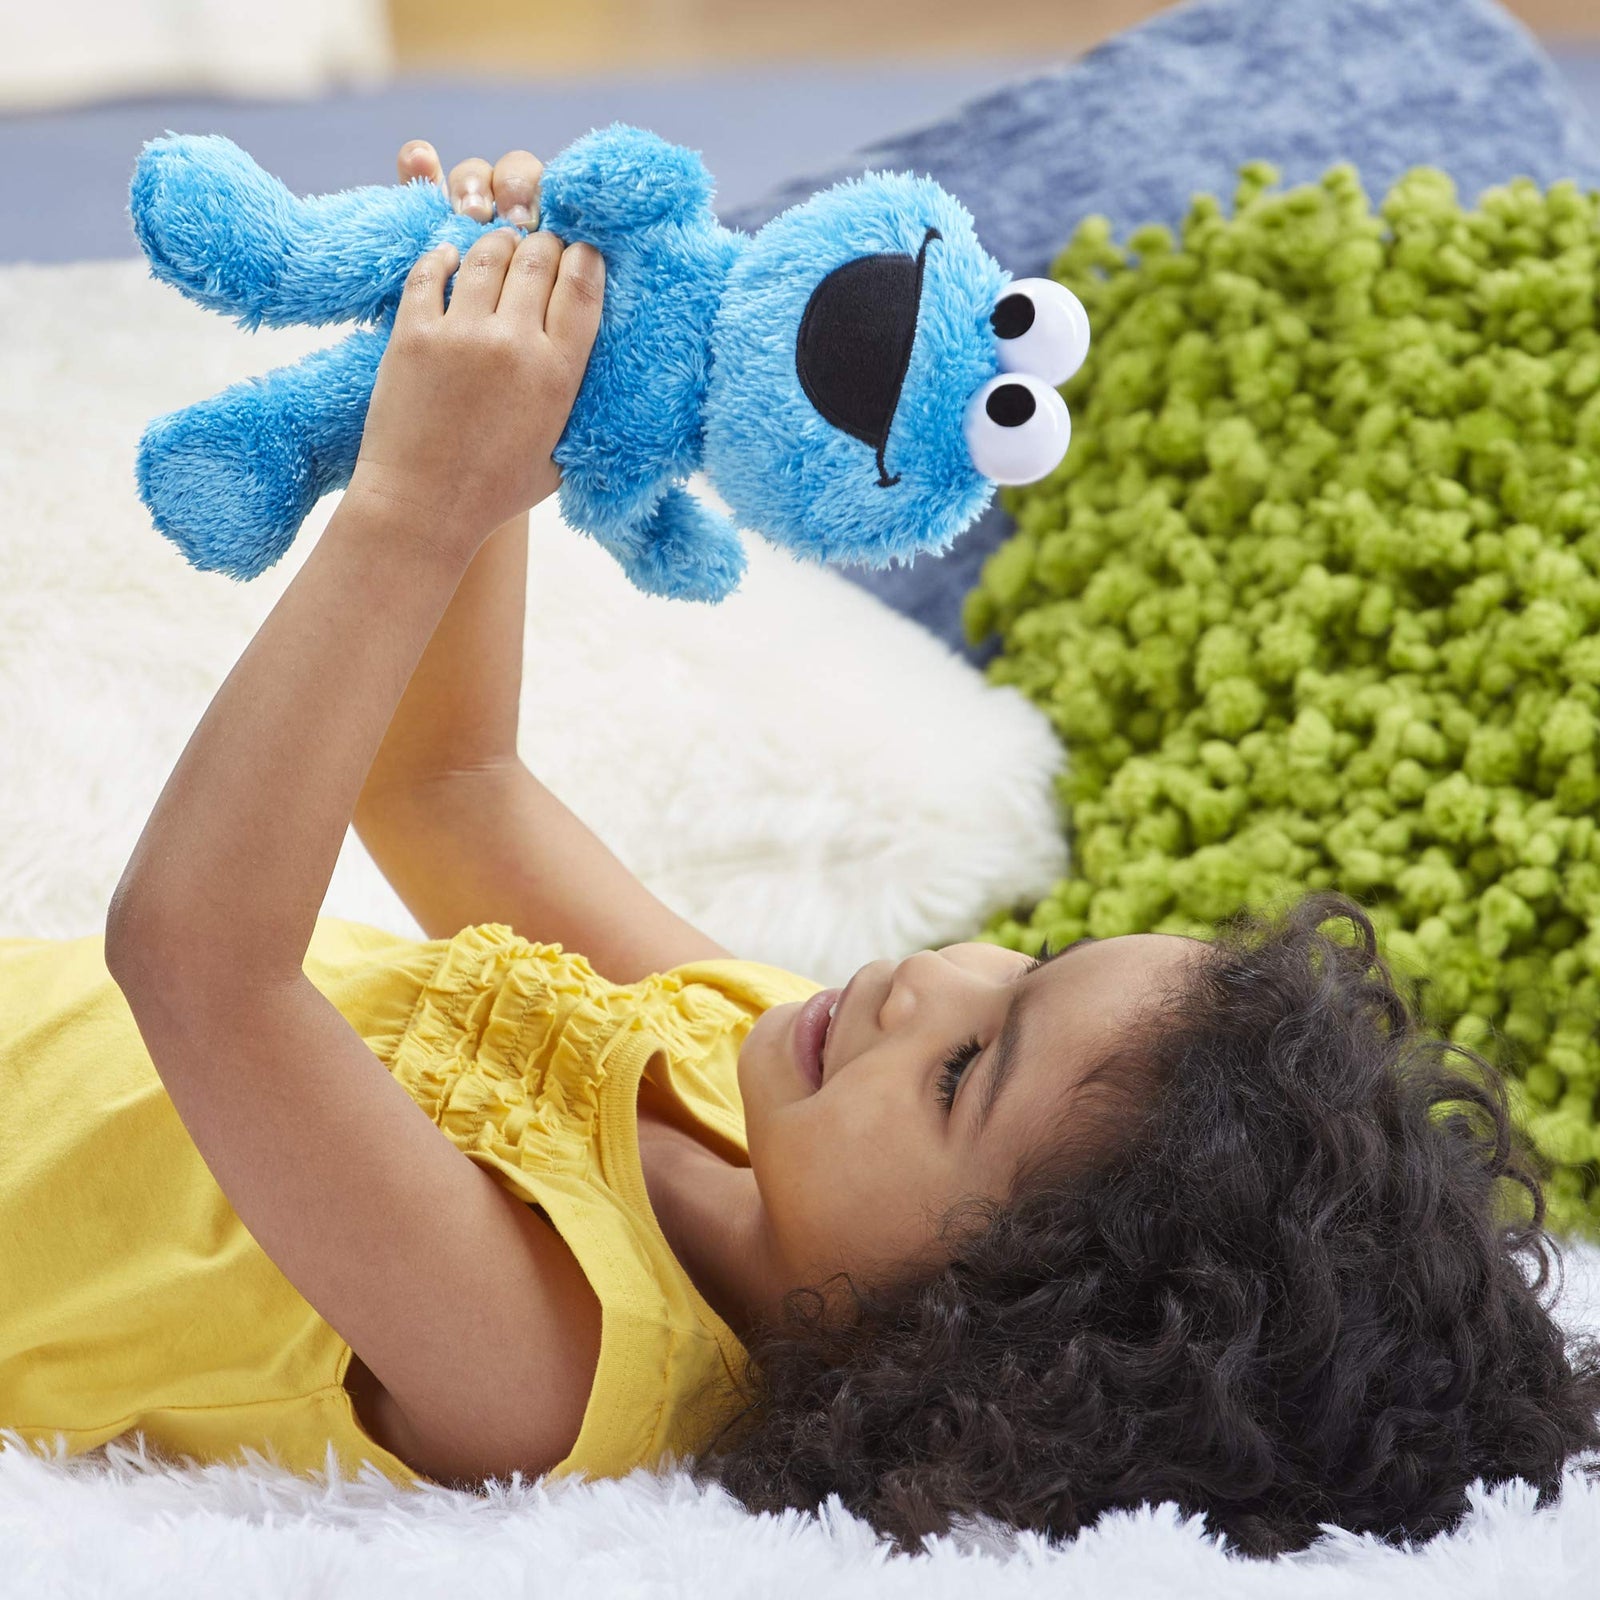 Sesame Street Little Laughs Tickle Me Cookie Monster, Talking, Laughing 10-Inch Plush Toy for Toddlers, Kids 12 Months and Up, 10 inches